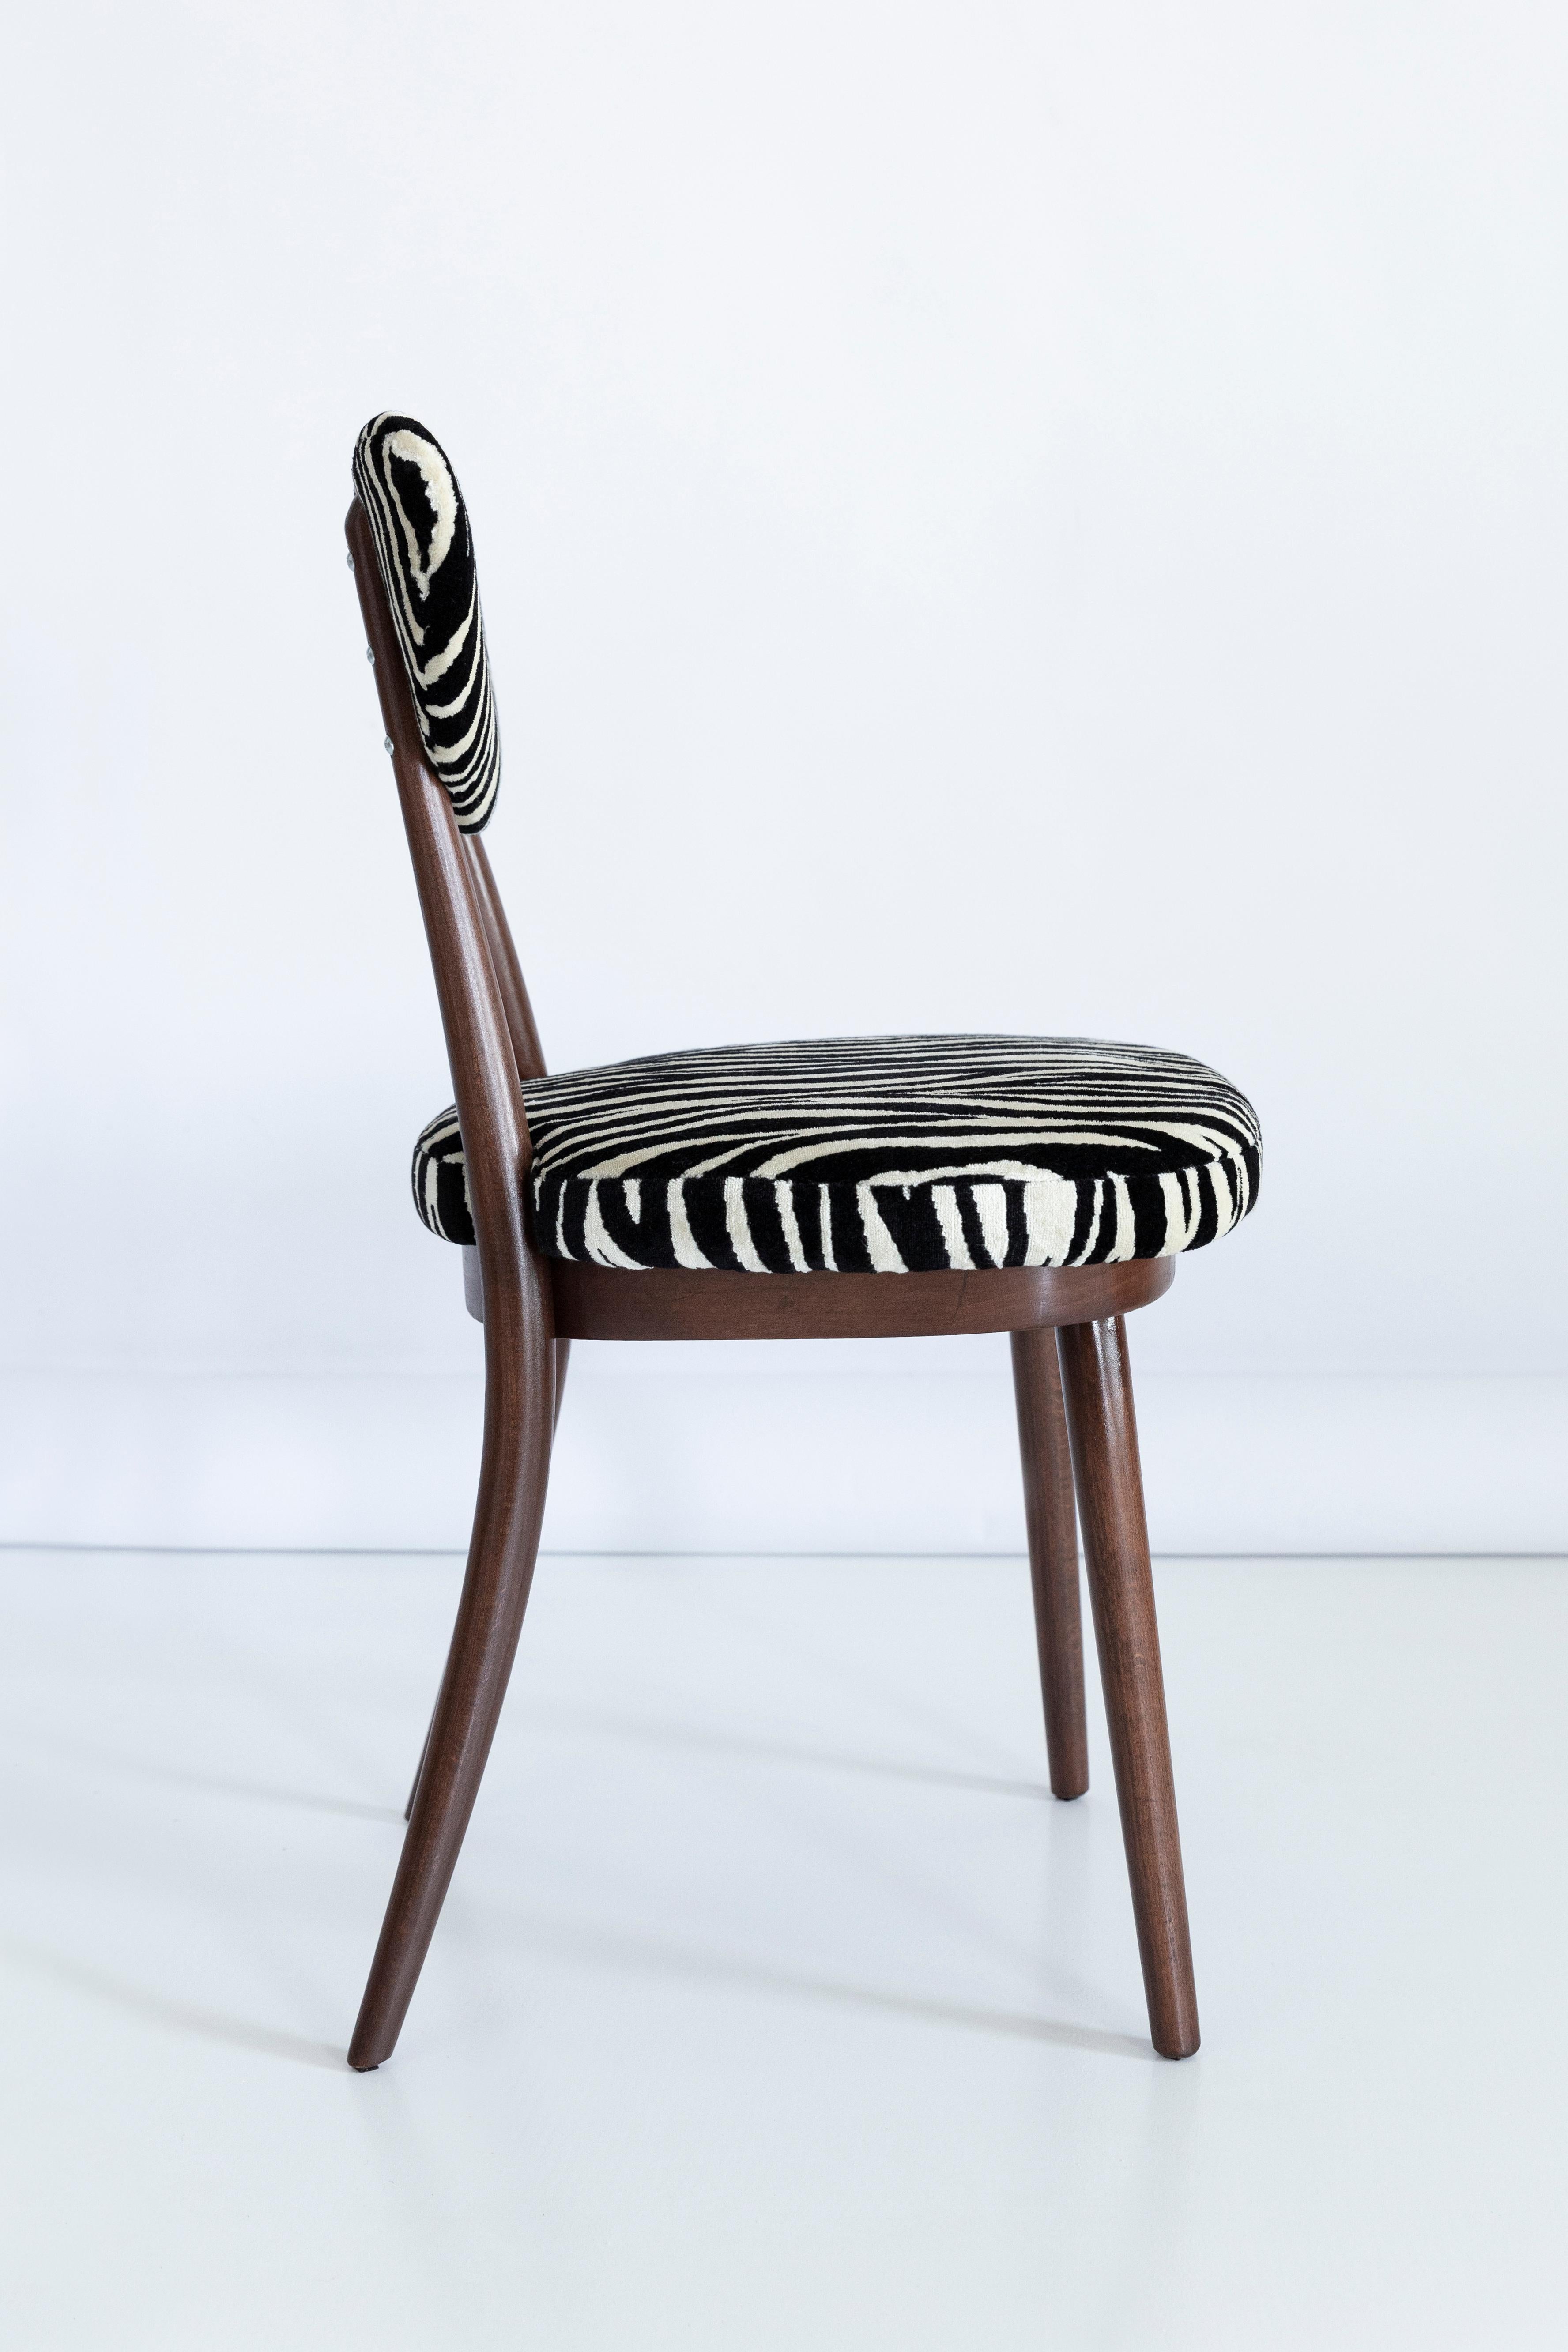 Set of Four Midcentury Zebra Black and White Heart Chairs, Poland, 1960s For Sale 5